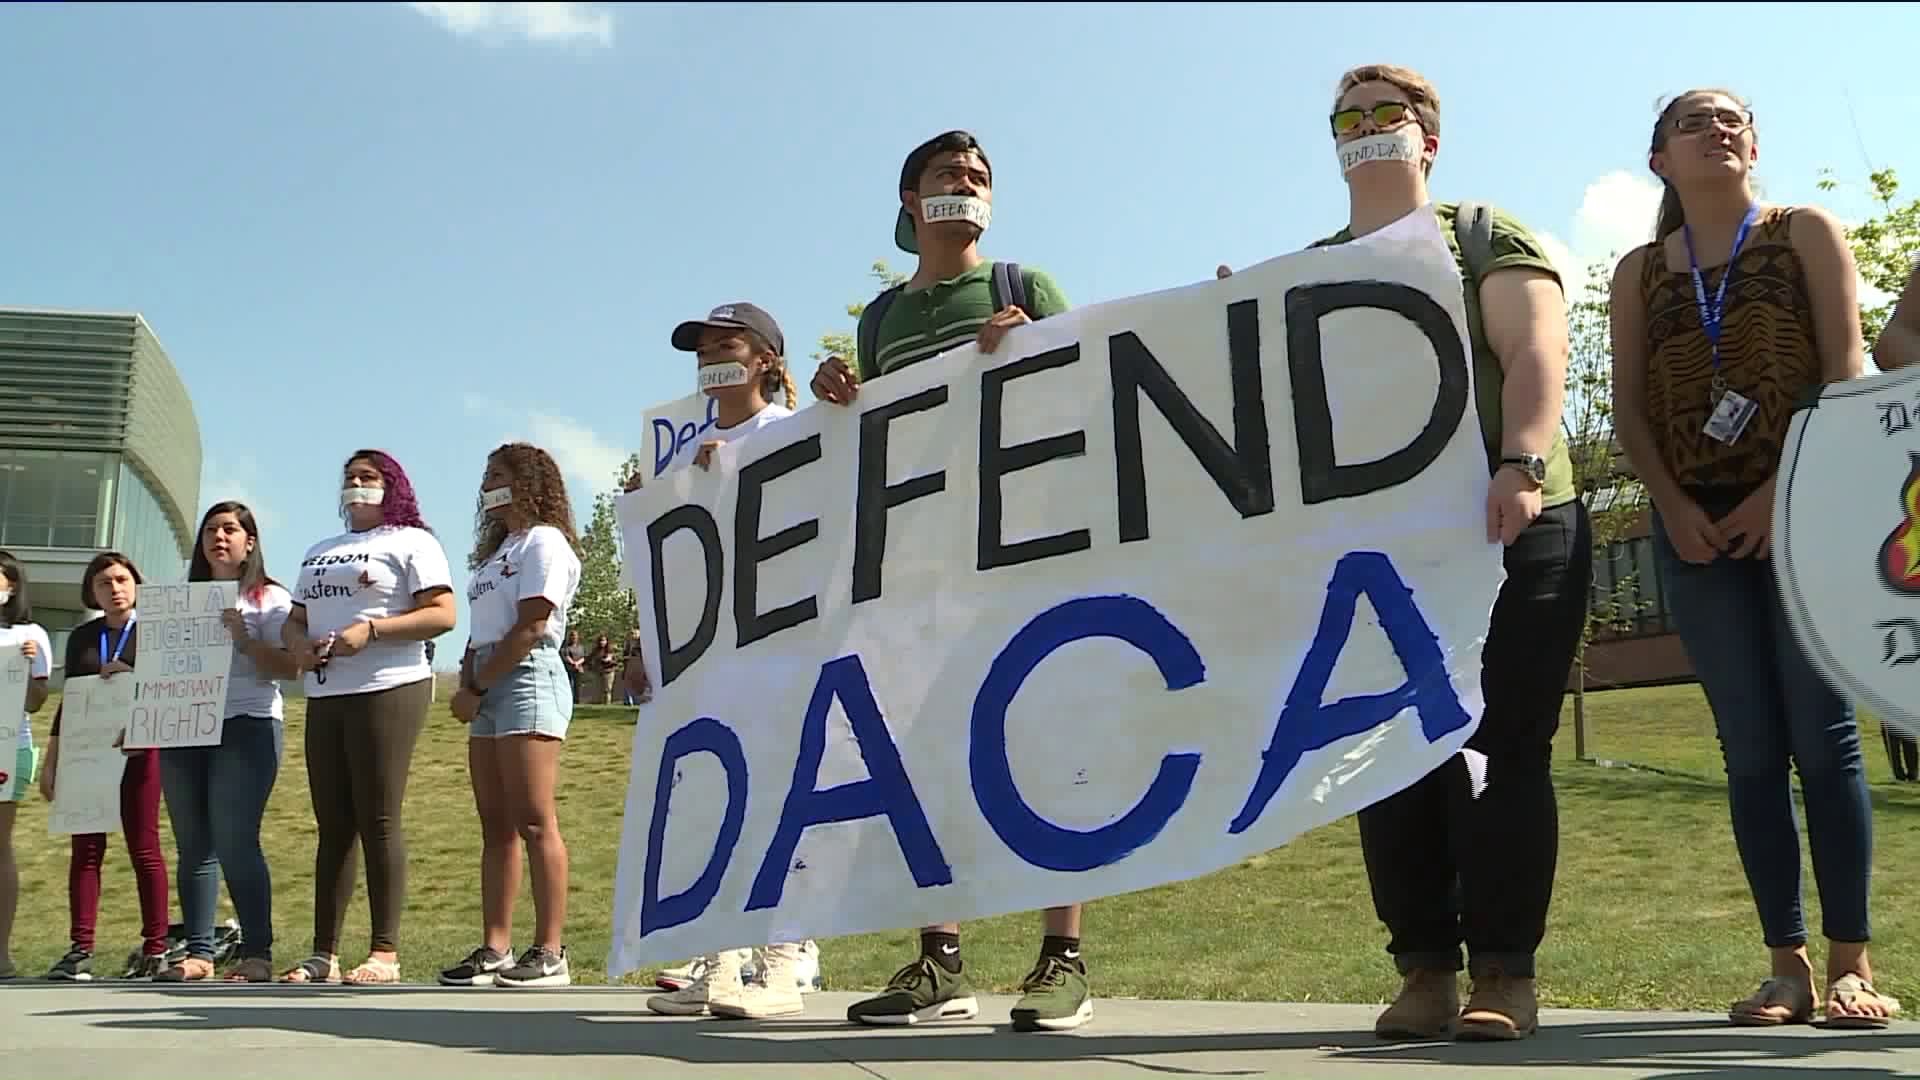 SCOTUS could allow Trump administration to abolish DACA protections